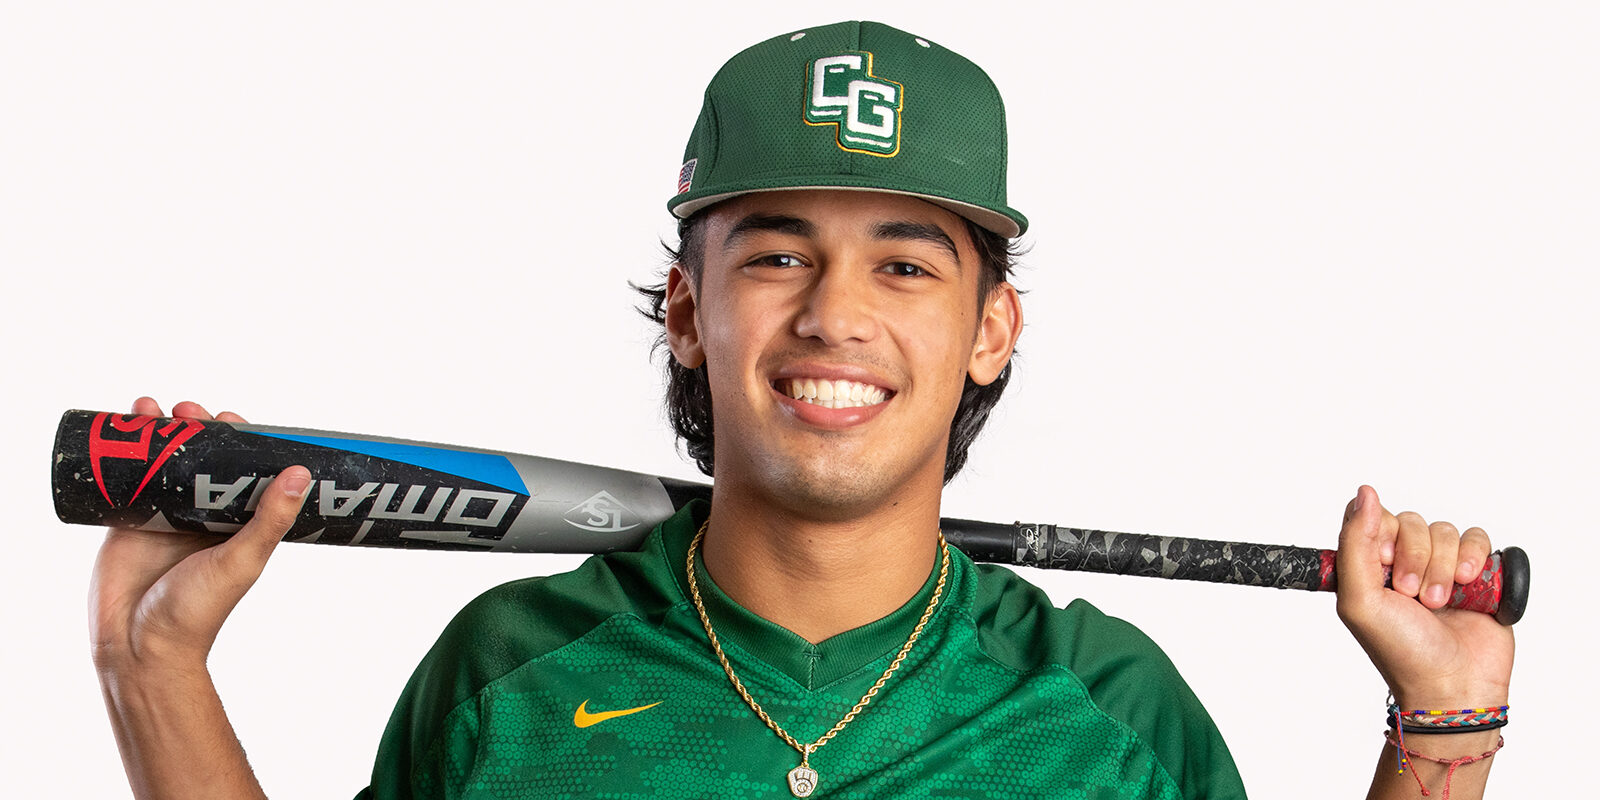 Smiling male baseball player in green hat, and green jersey with a baseball bat behind his neck.